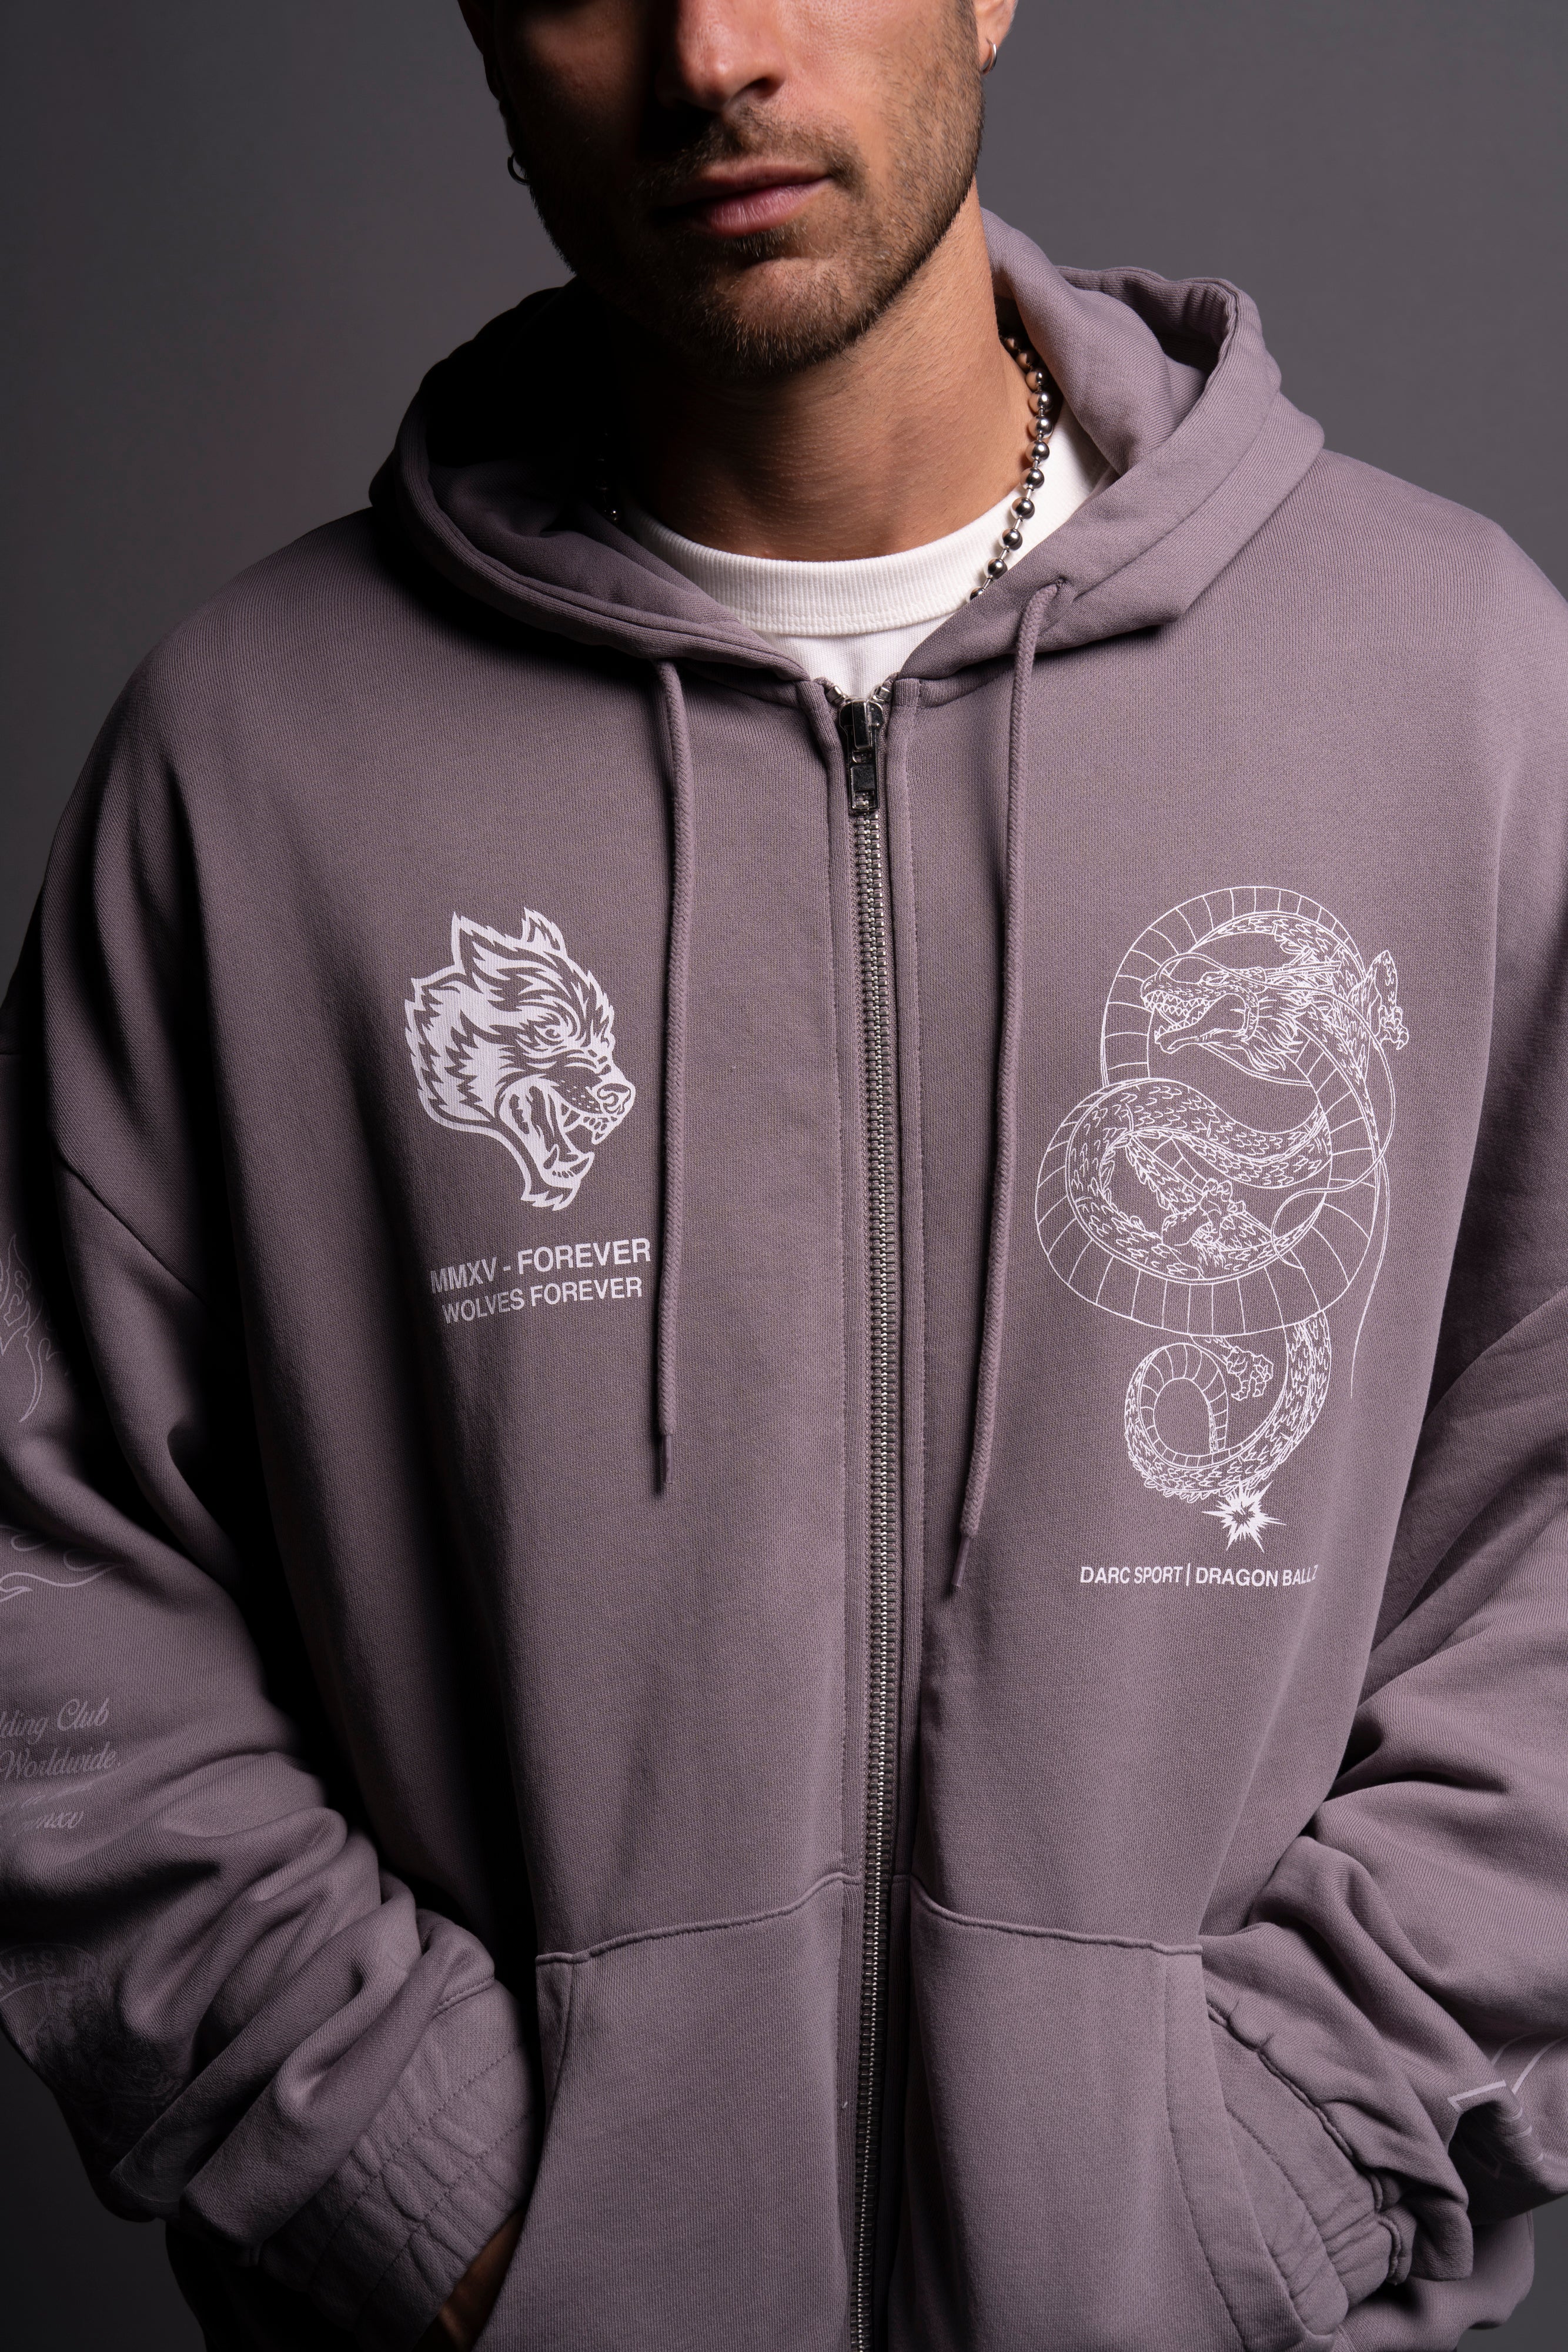 Shenron "Chambers" Zip Hoodie in Pale Gray